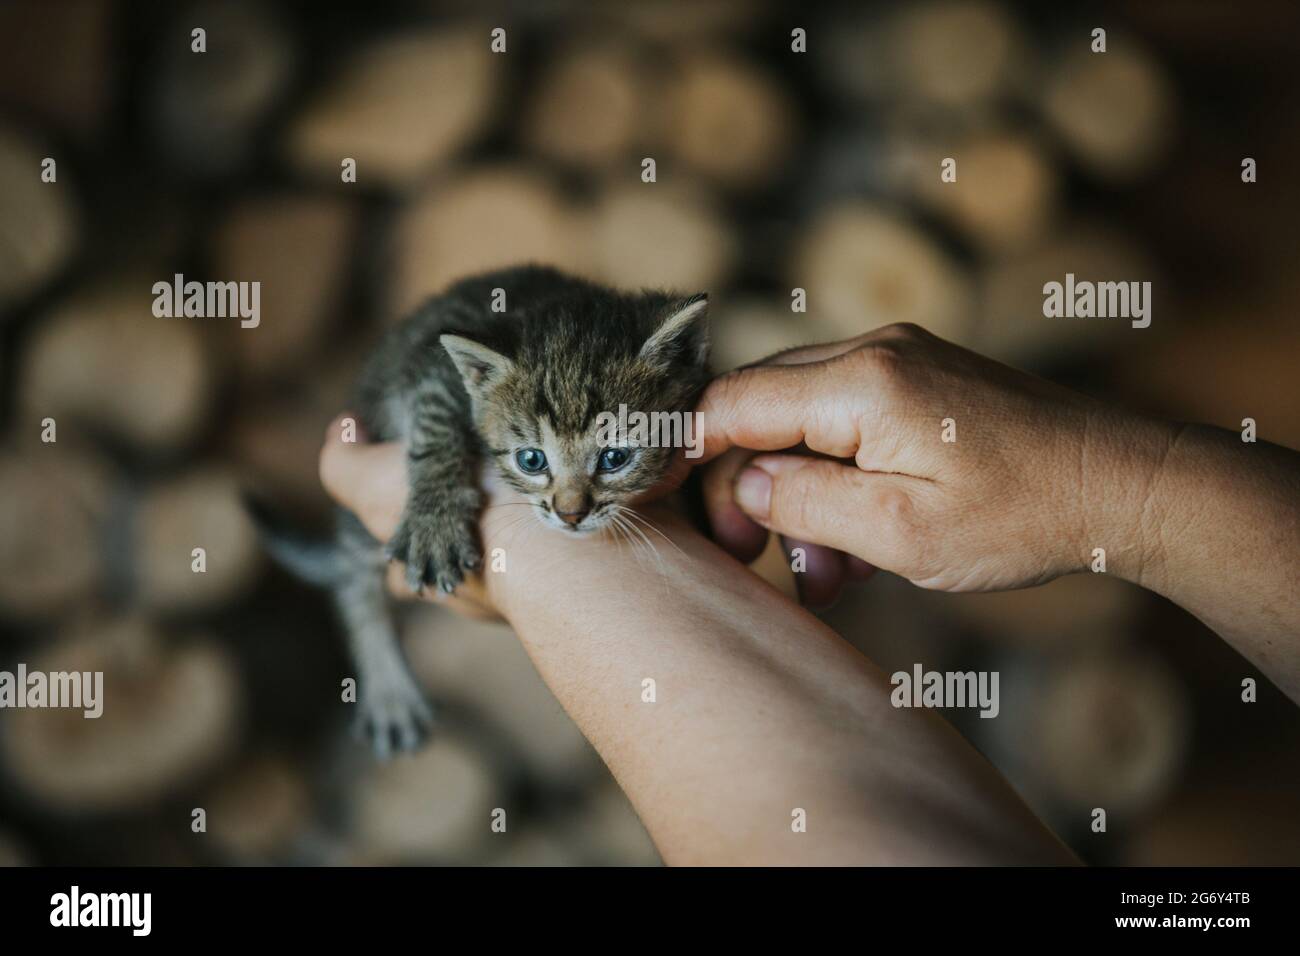 Closeup of a person holding an adorable fluffy small striped  kitten Stock Photo